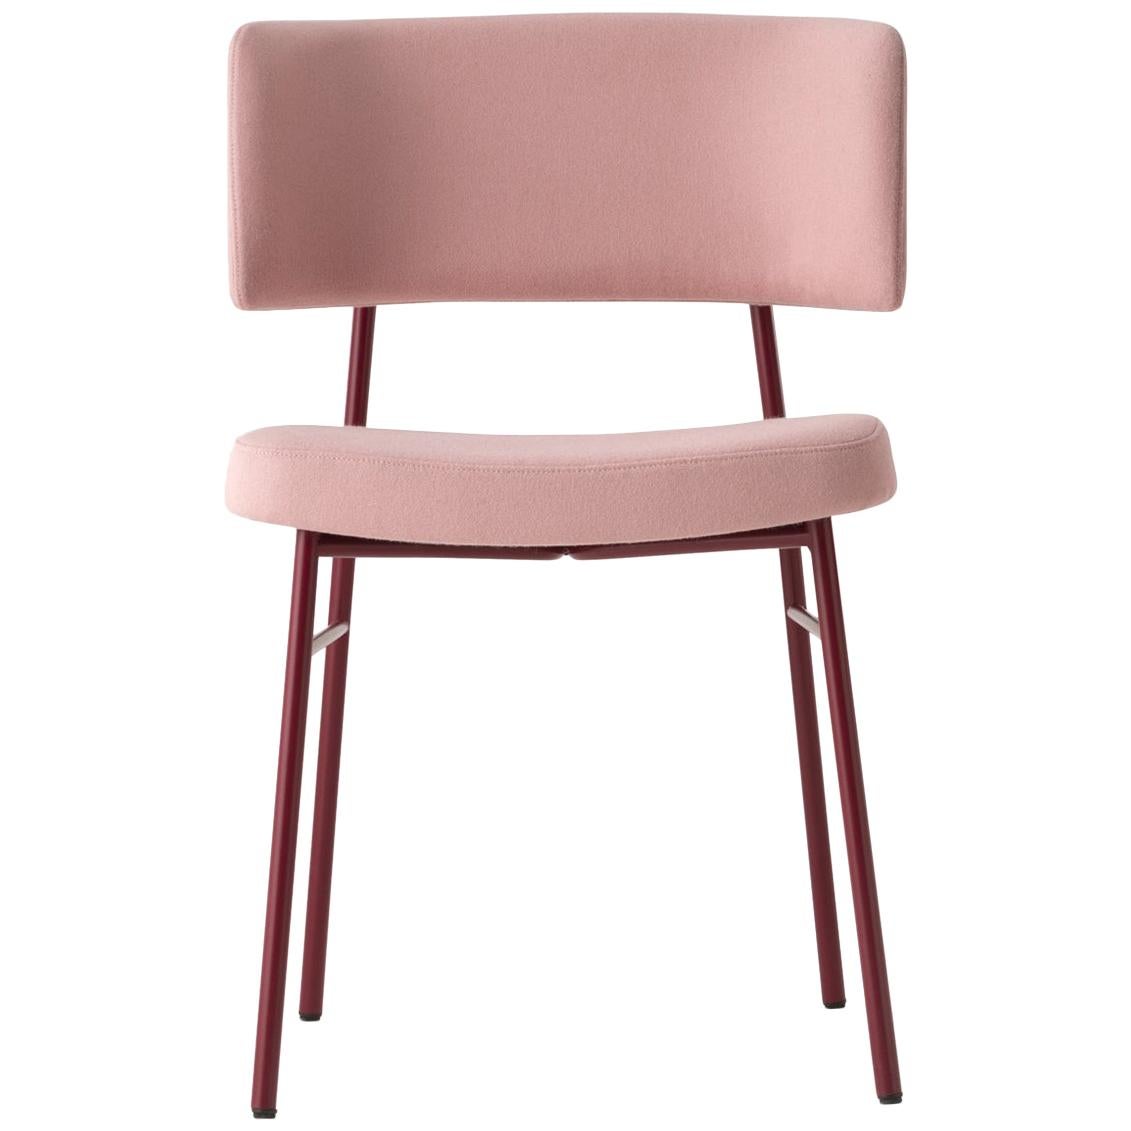 Comfort, an ergonomic shape and a hardy structure are the characteristics of the Marlen design, the new Trabà chair designed by EP Studio.
Hints of a 1950s vibe can be glimpsed in the curvature of the backrest, generously padded, like the seat, and